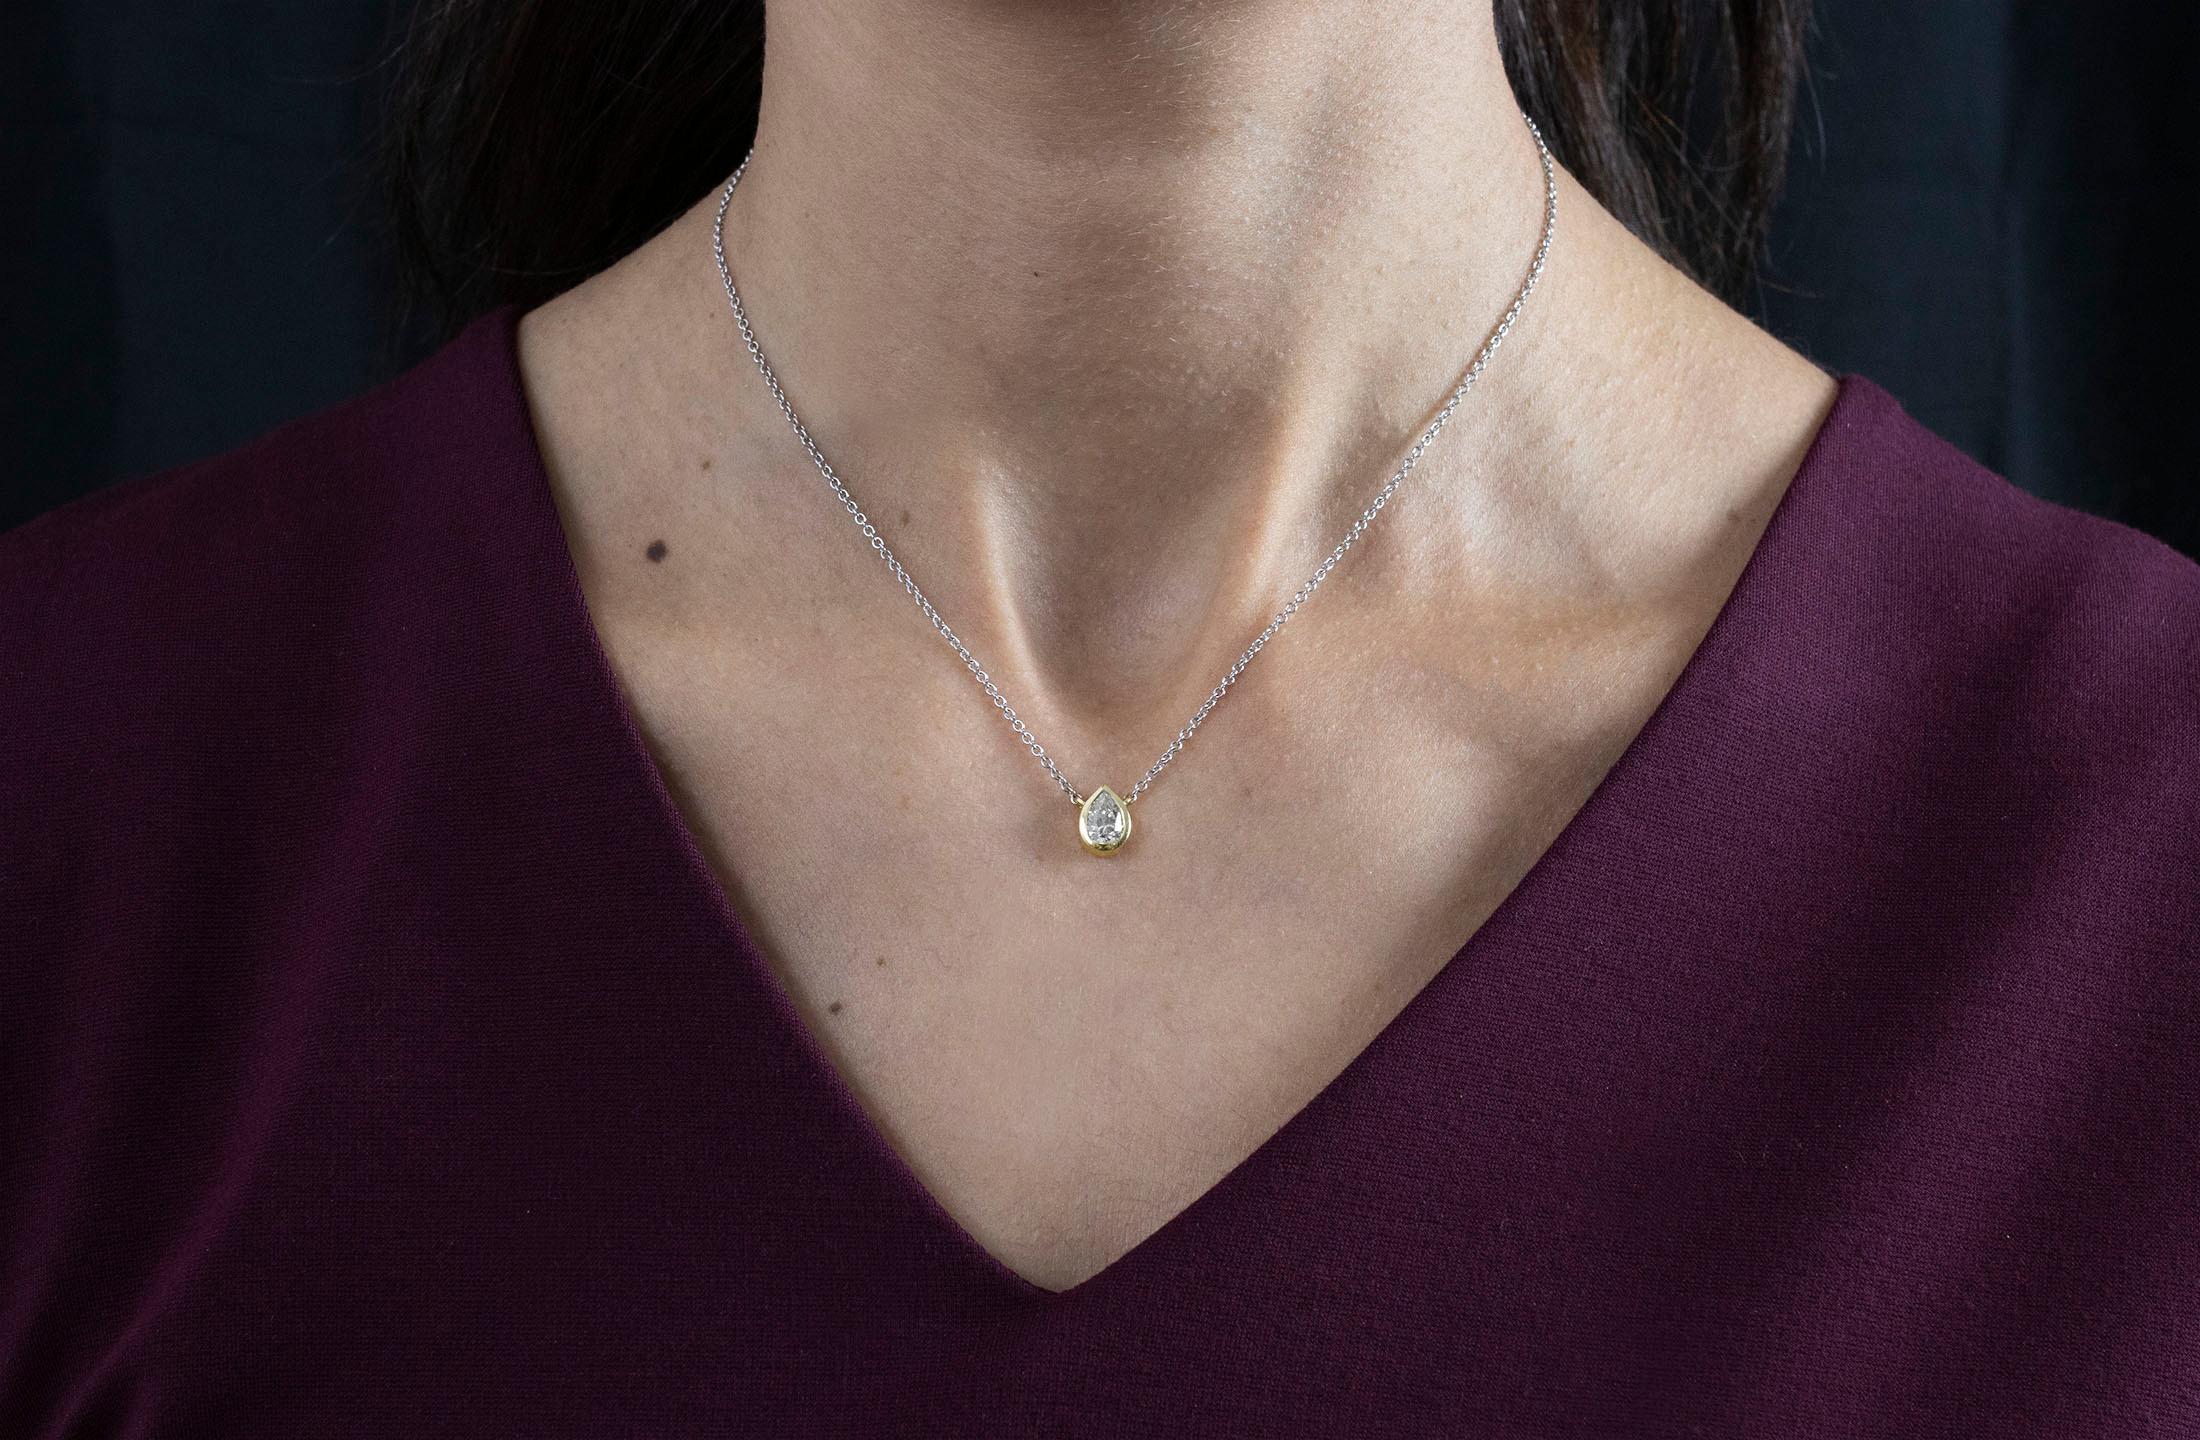 A simple pendant necklace showcasing a GIA Certified 0.92 carat pear shape diamond, L Color and SI2 in Clarity. Bezel set in 14K Yellow Gold, suspended on a 14K White Gold Chain. 16 inches in Length. 

Roman Malakov is a custom house, specializing